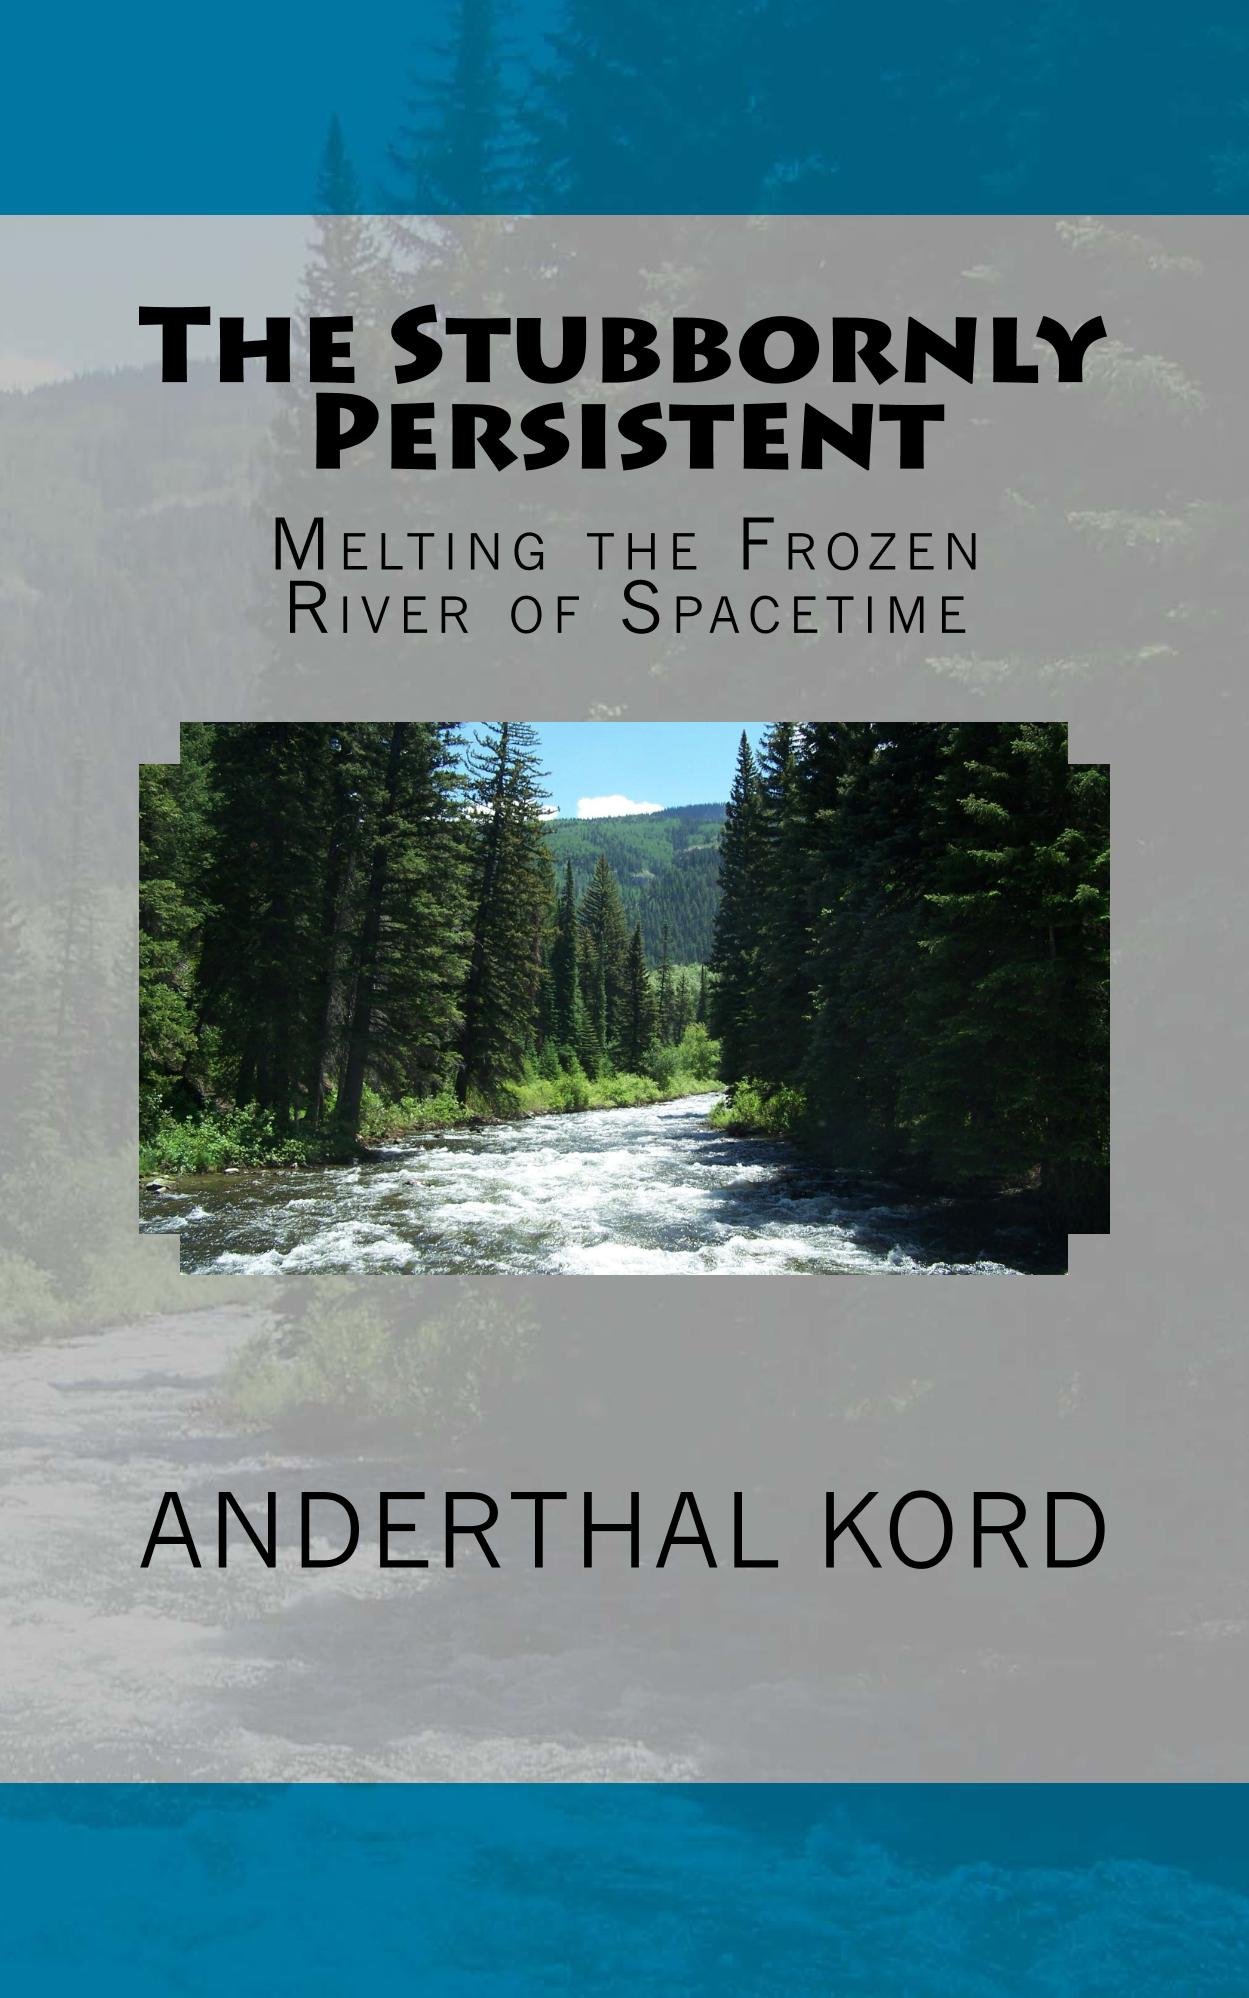 The Stubbornly Persistent: Melting the Frozen River of Spacetime